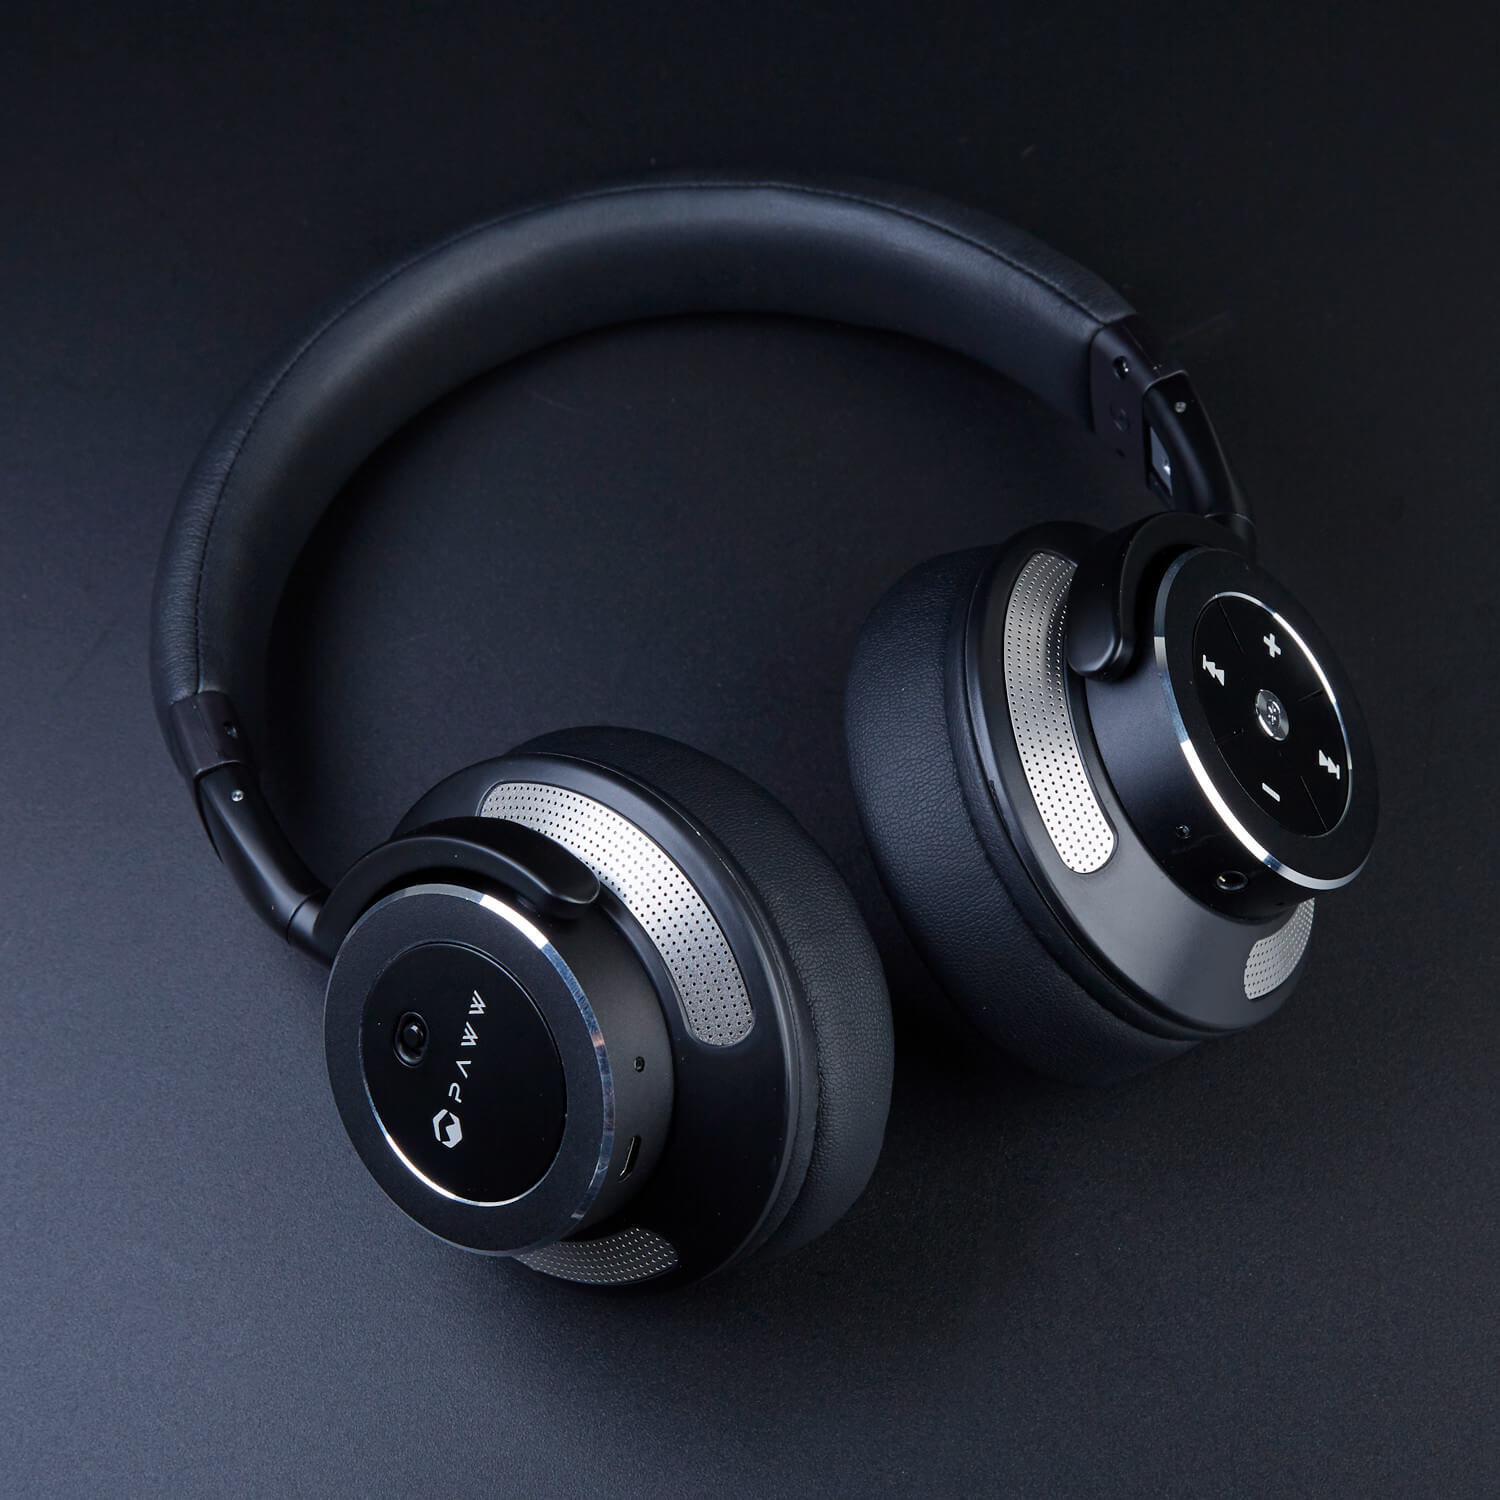 Score these noise-cancelling headphones for nearly half-off